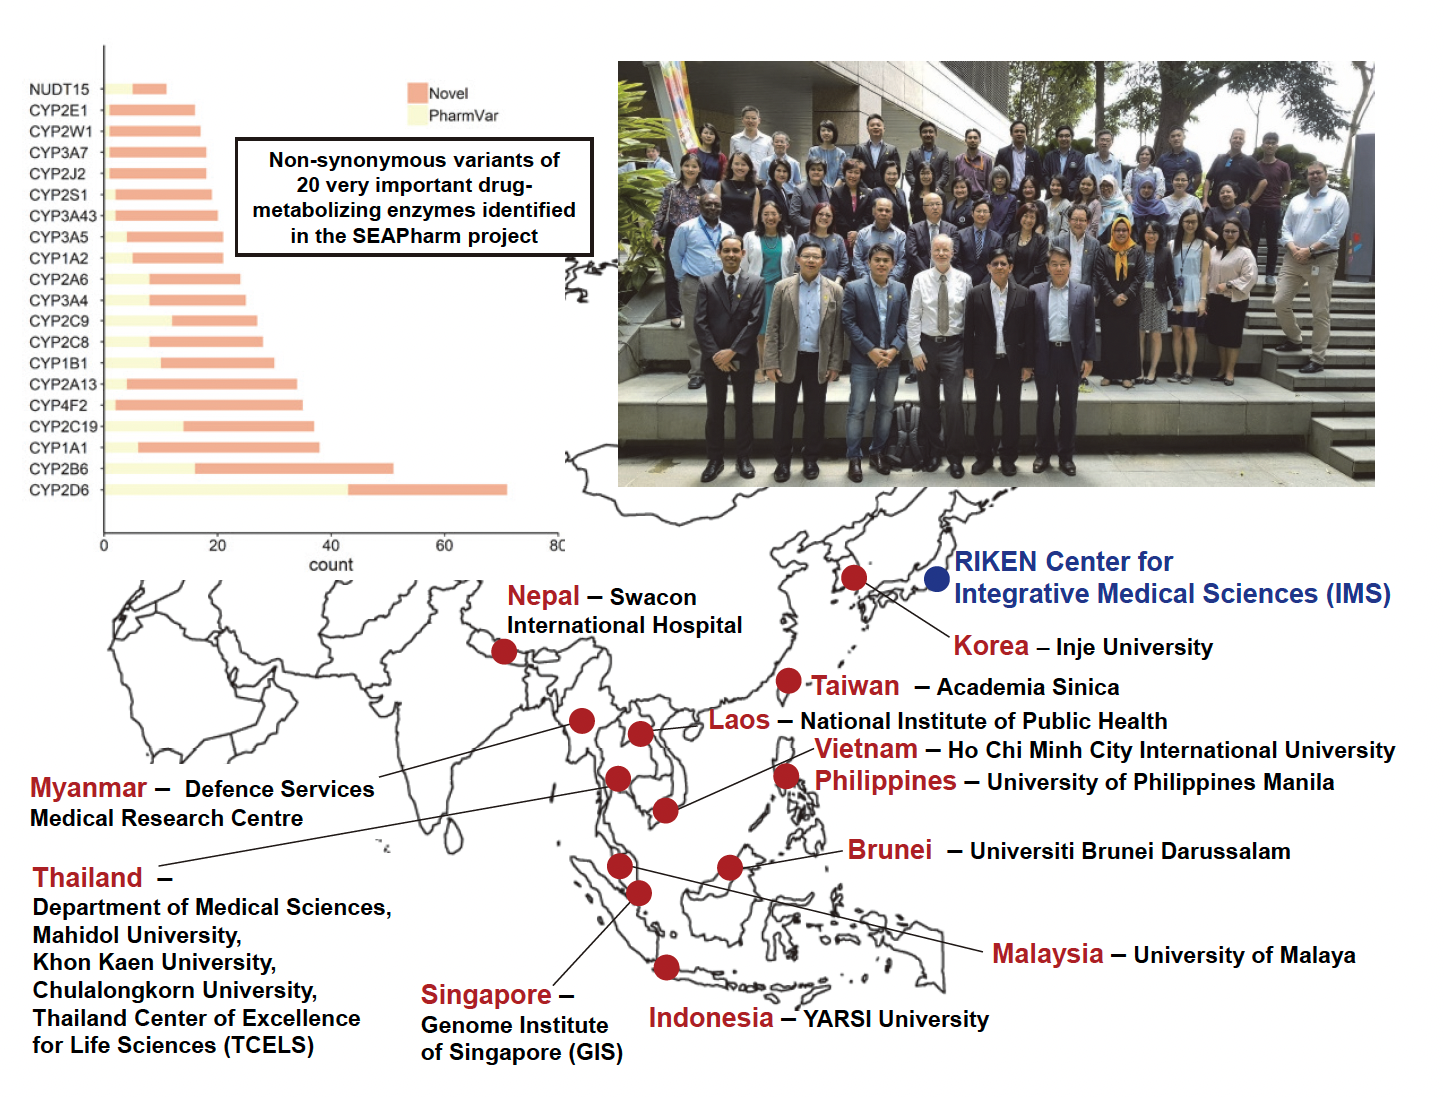 Members of the South East Asian Pharmacogenomics Research Network